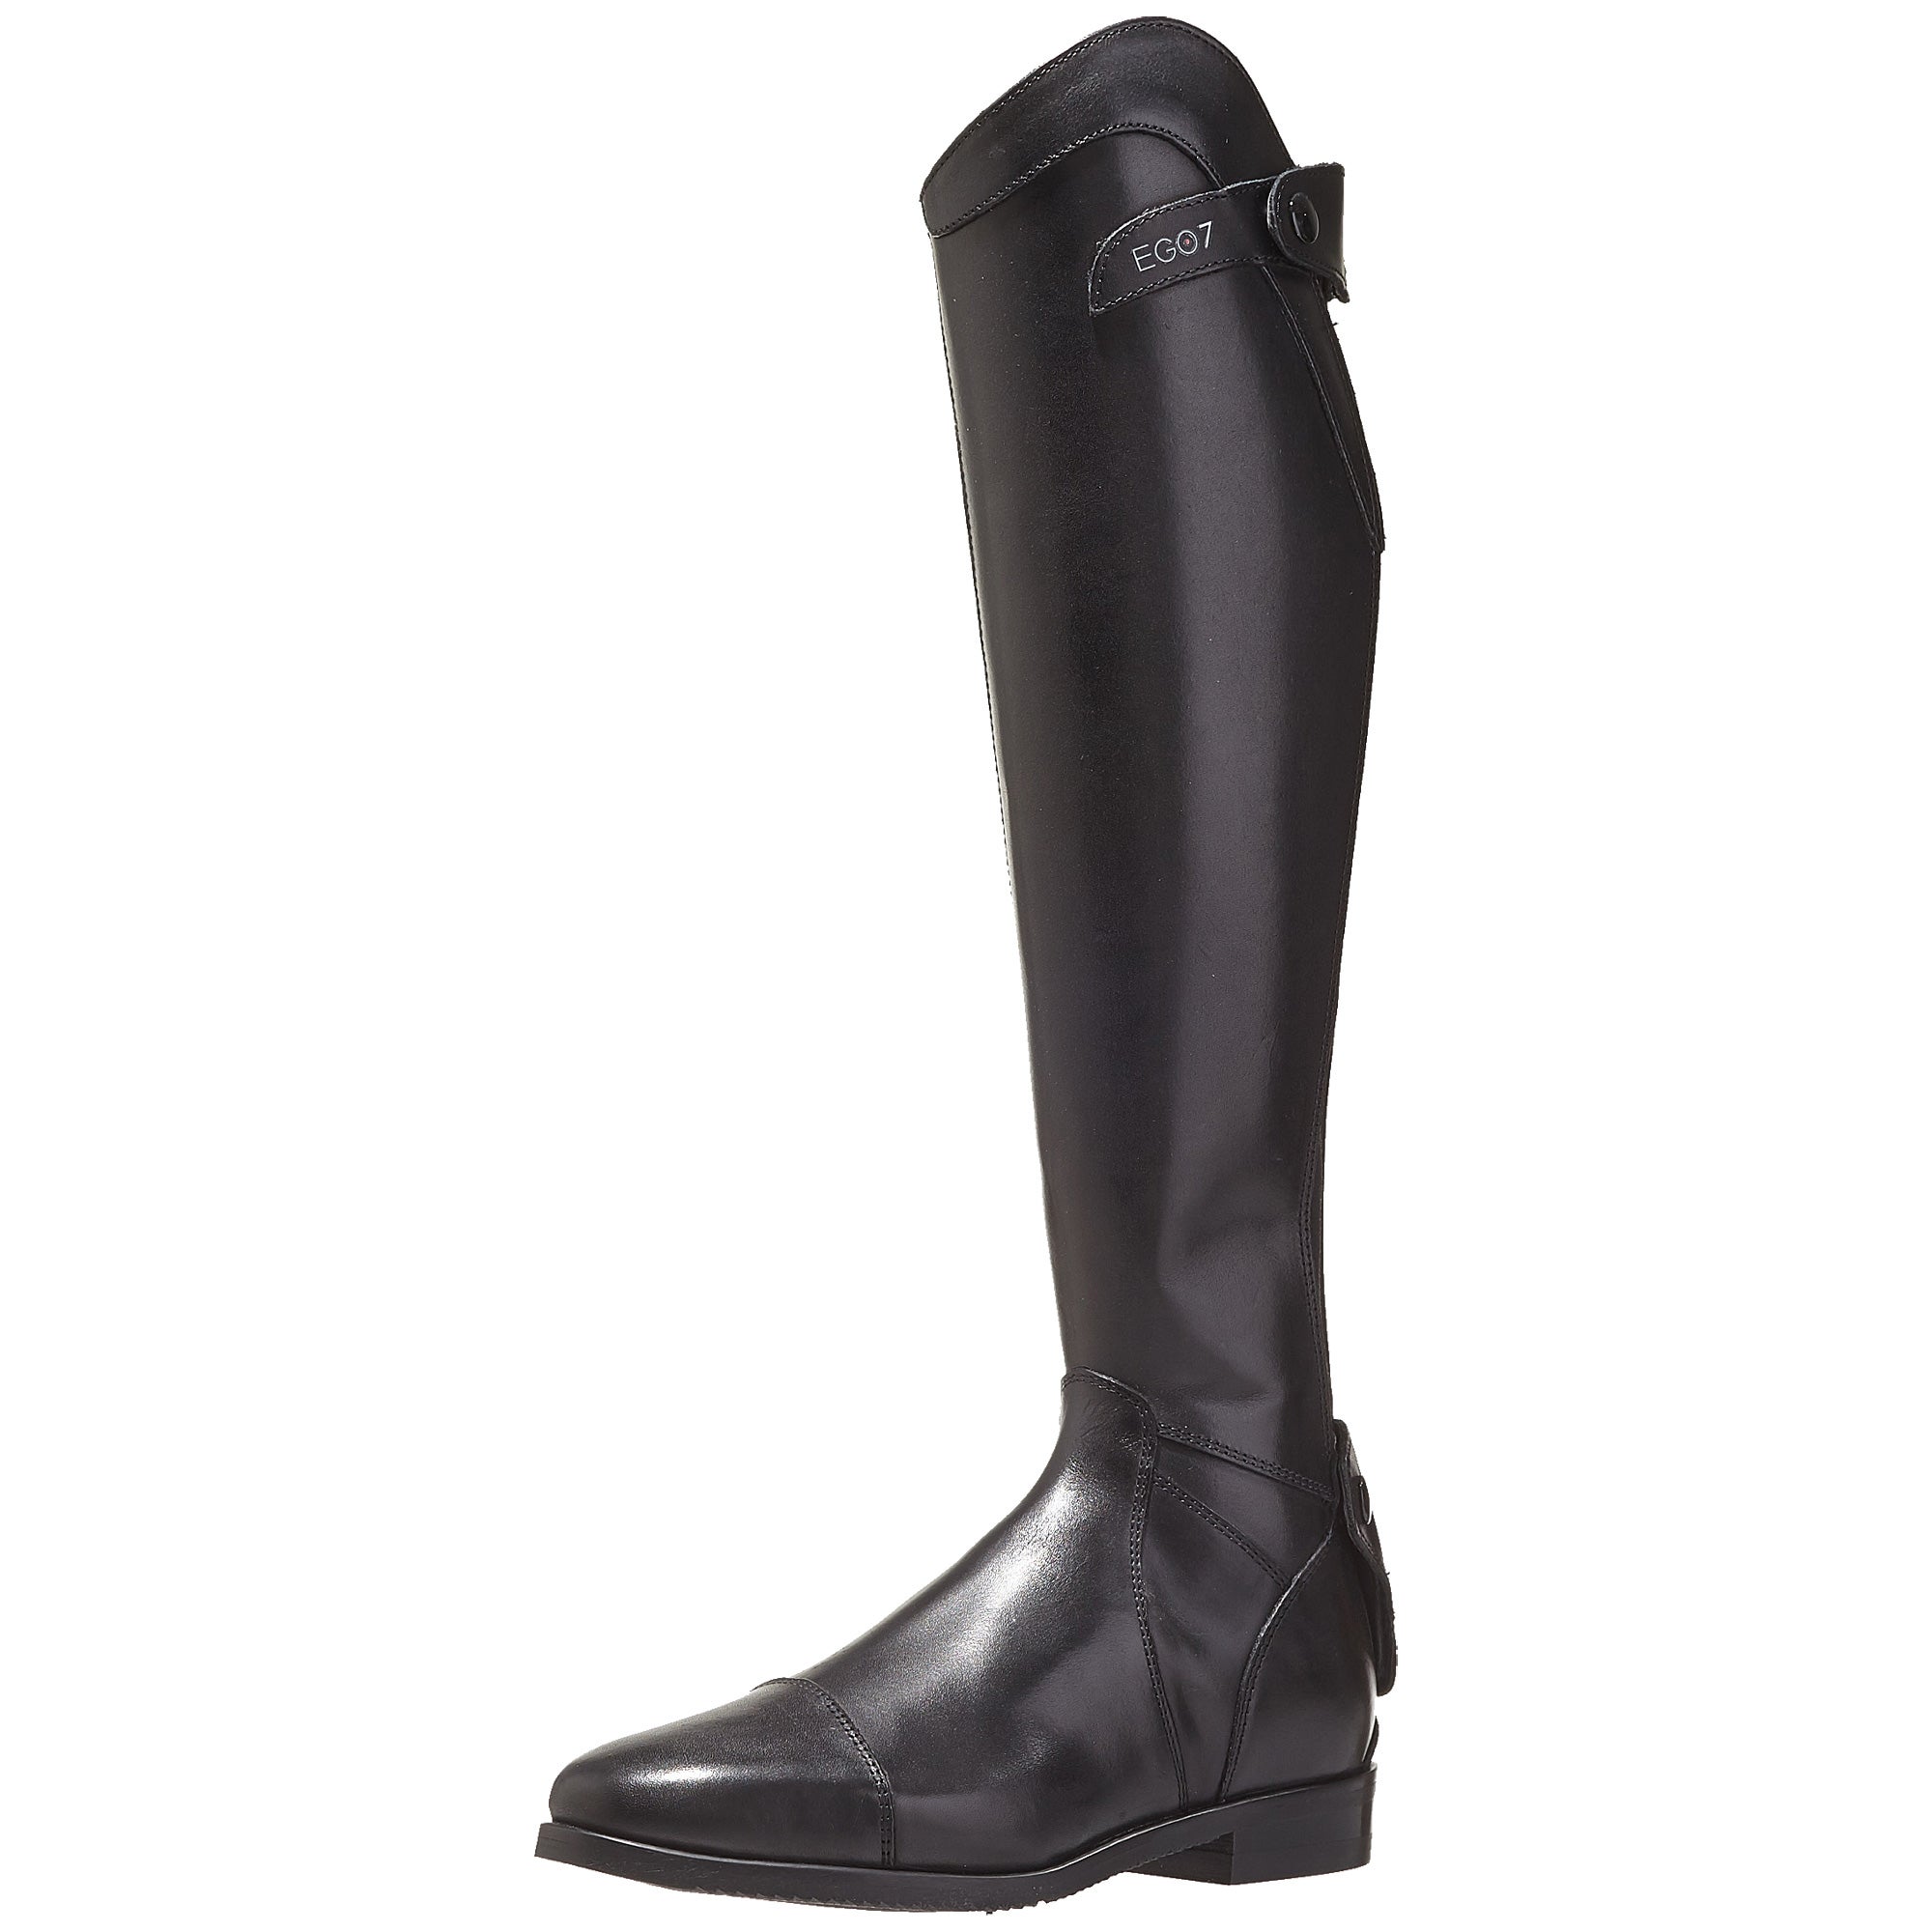 EGO7 Aries Tall Dress Boots - Riding Warehouse